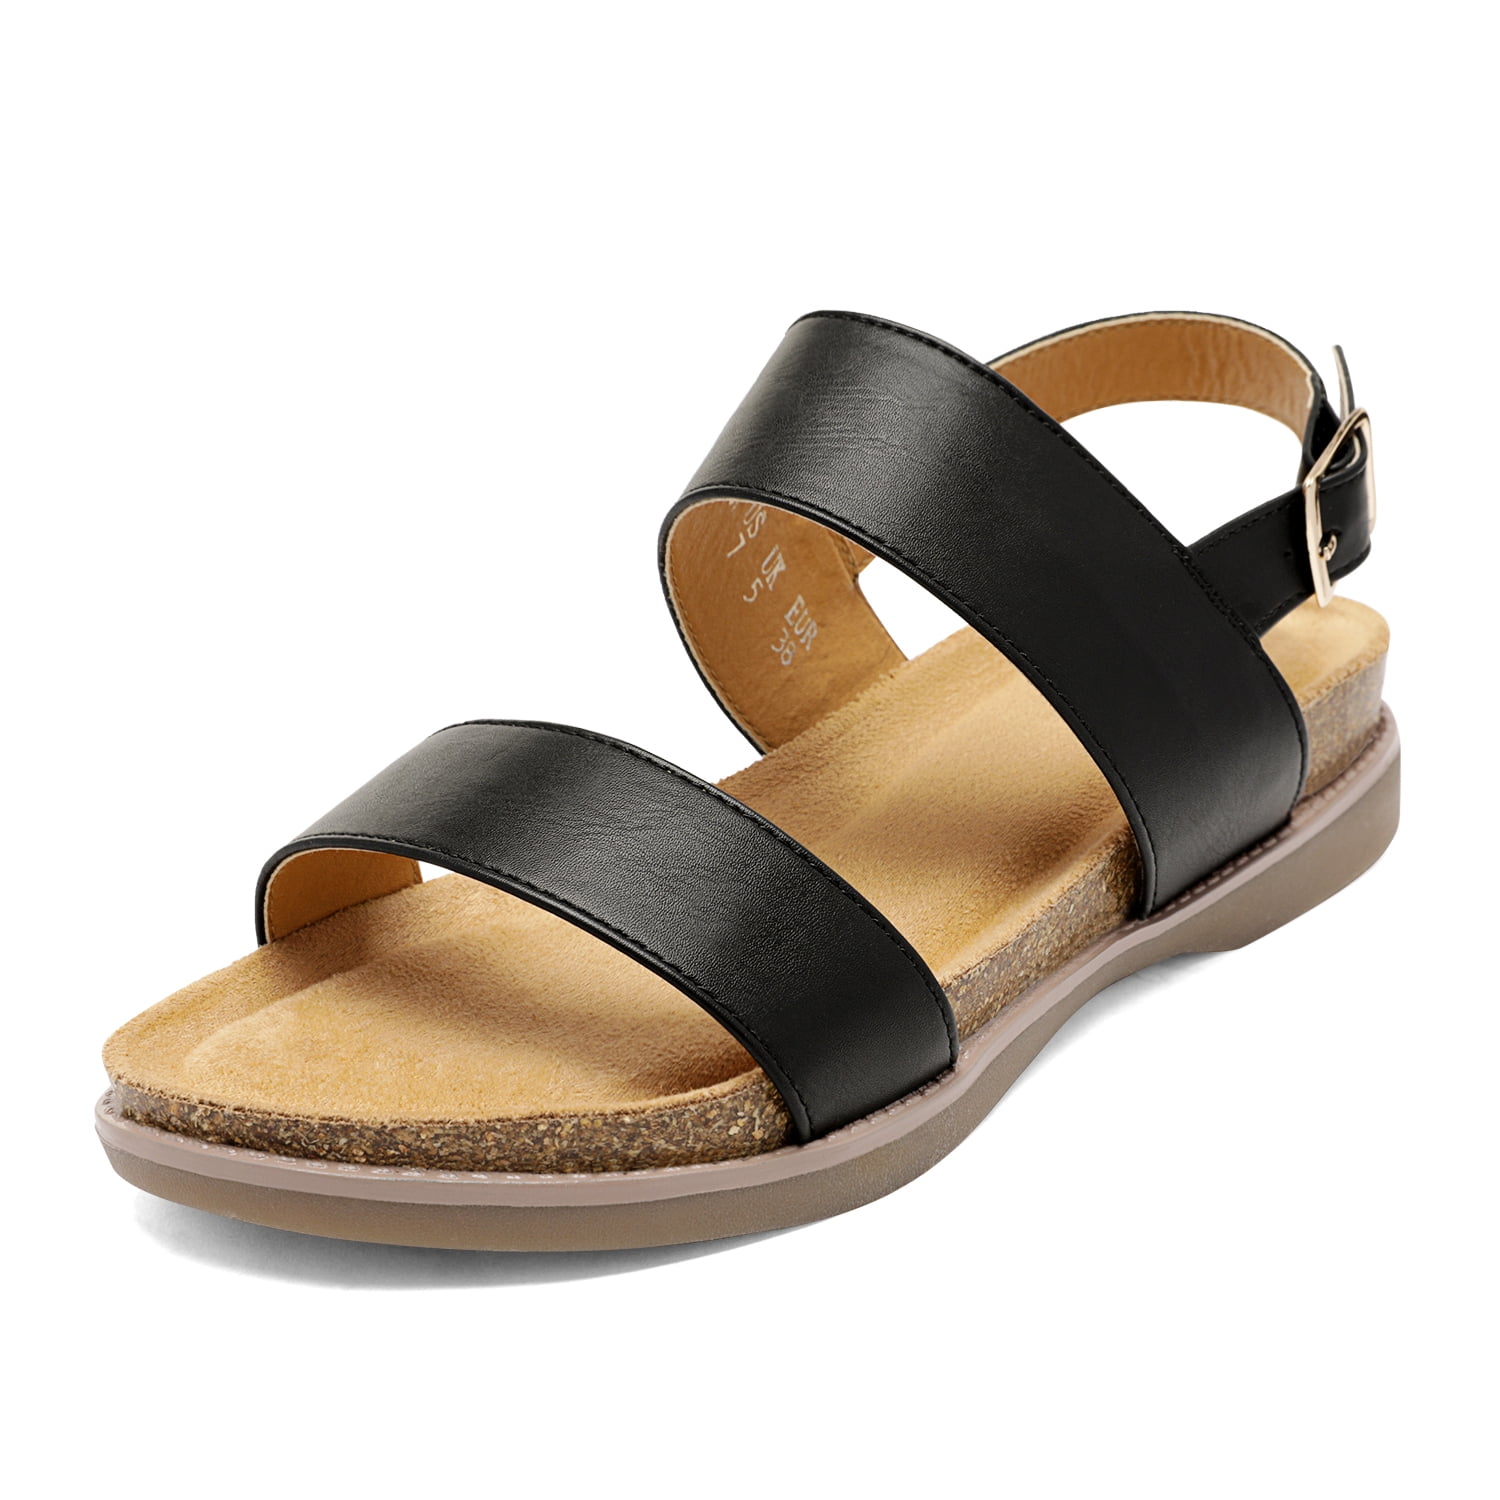 one toe strap sandals